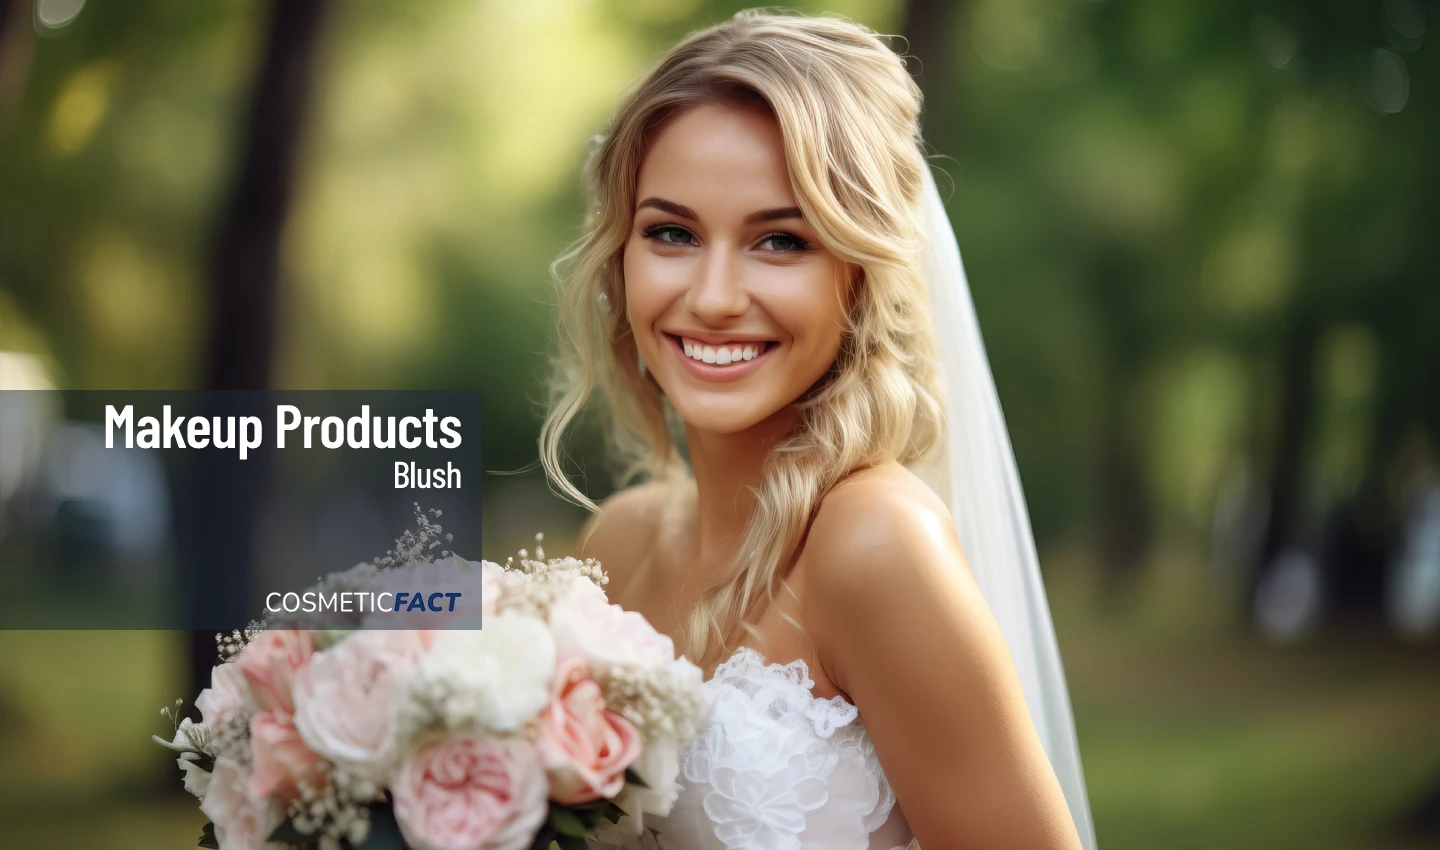 A smiling bride on her wedding day with natural-looking makeup highlighted by the perfect bridal blush.